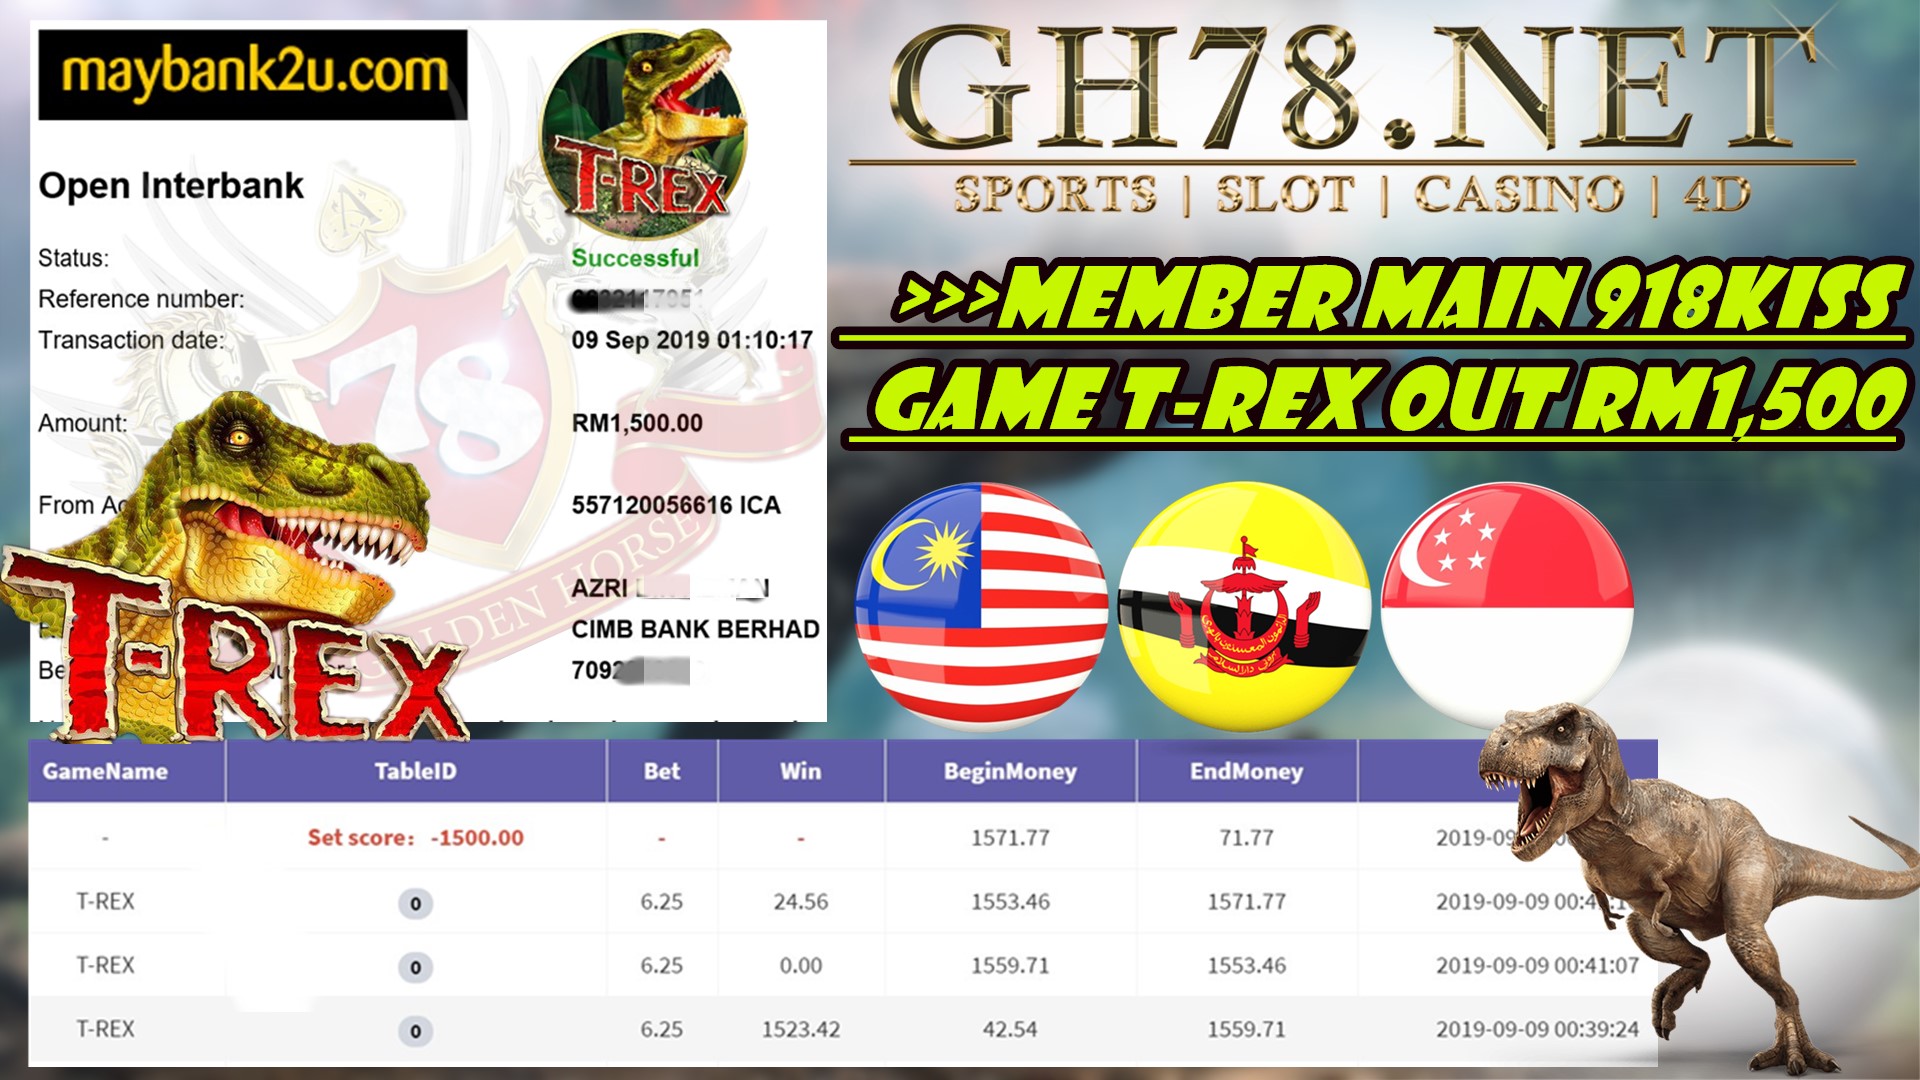 MEMBER MAIN GAME 918KISS FT.T-REX MINTA OUT RM1,500